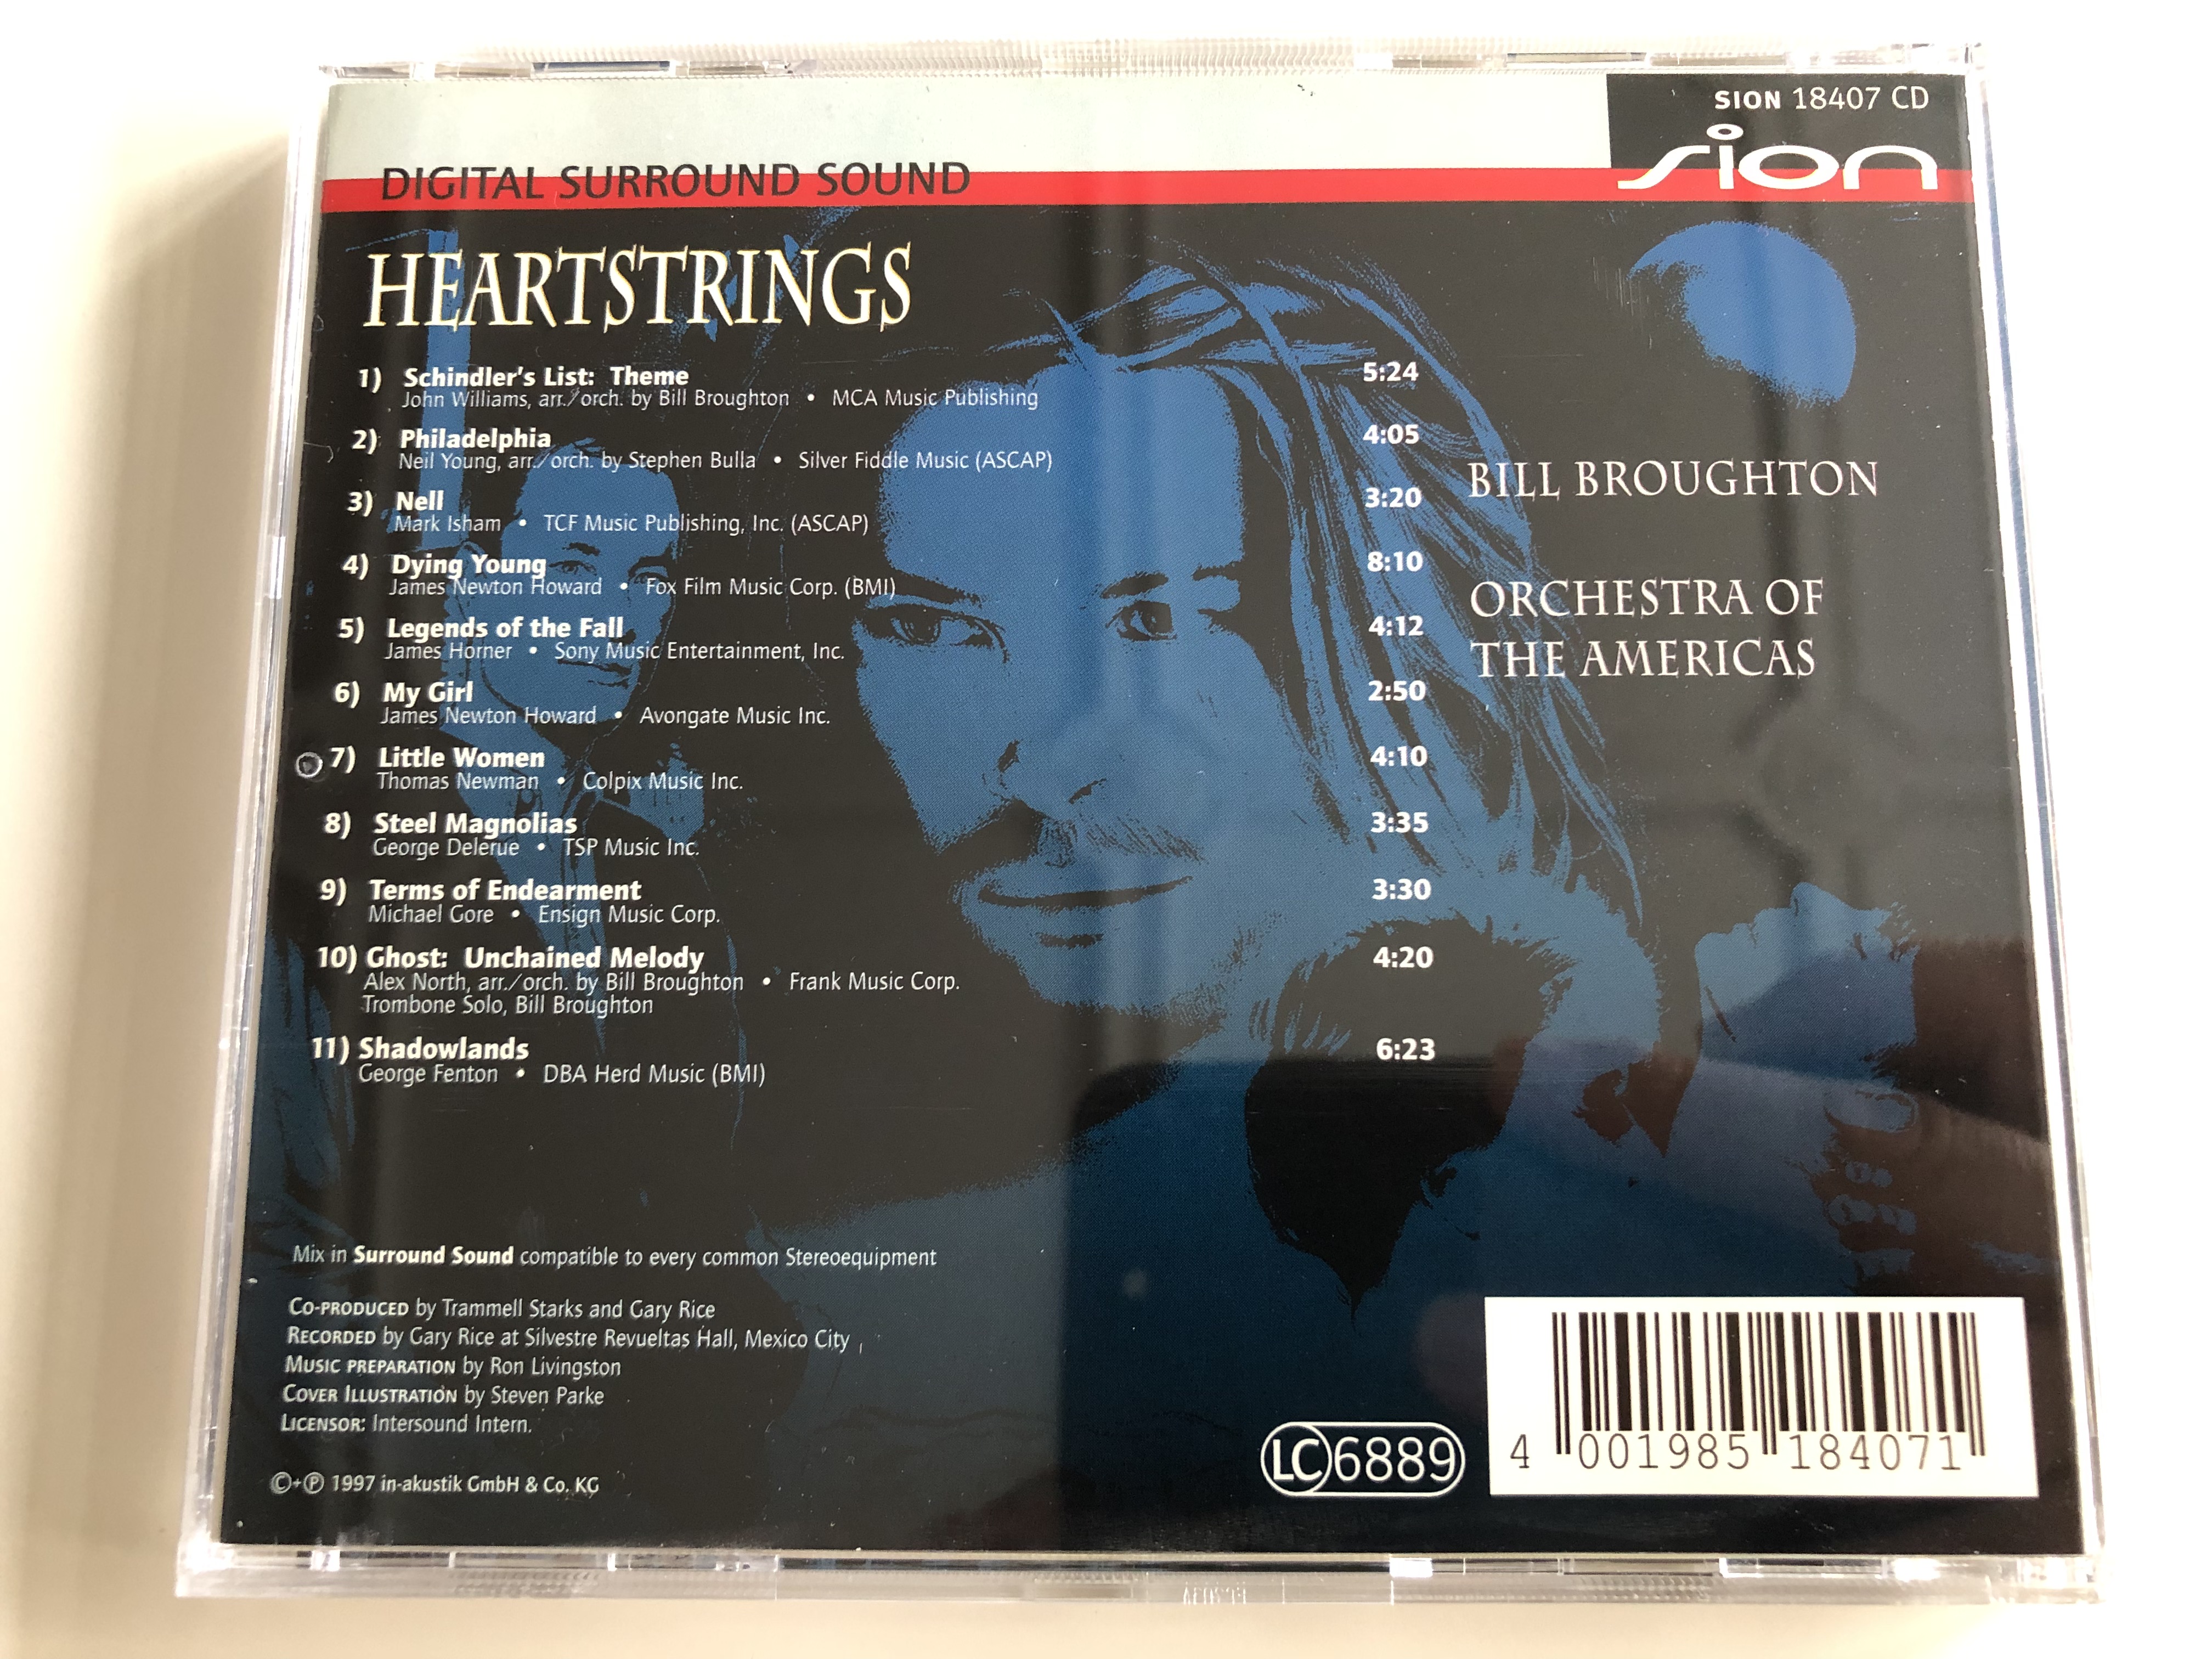 the-magic-of-the-movies-heartstrings-schindler-s-list-philadelphia-nell-dying-young-legends-of-the-fall-ghost-shadowlands-sion-18407-cd-digital-surround-sound-audio-cd-1997-3-.jpg